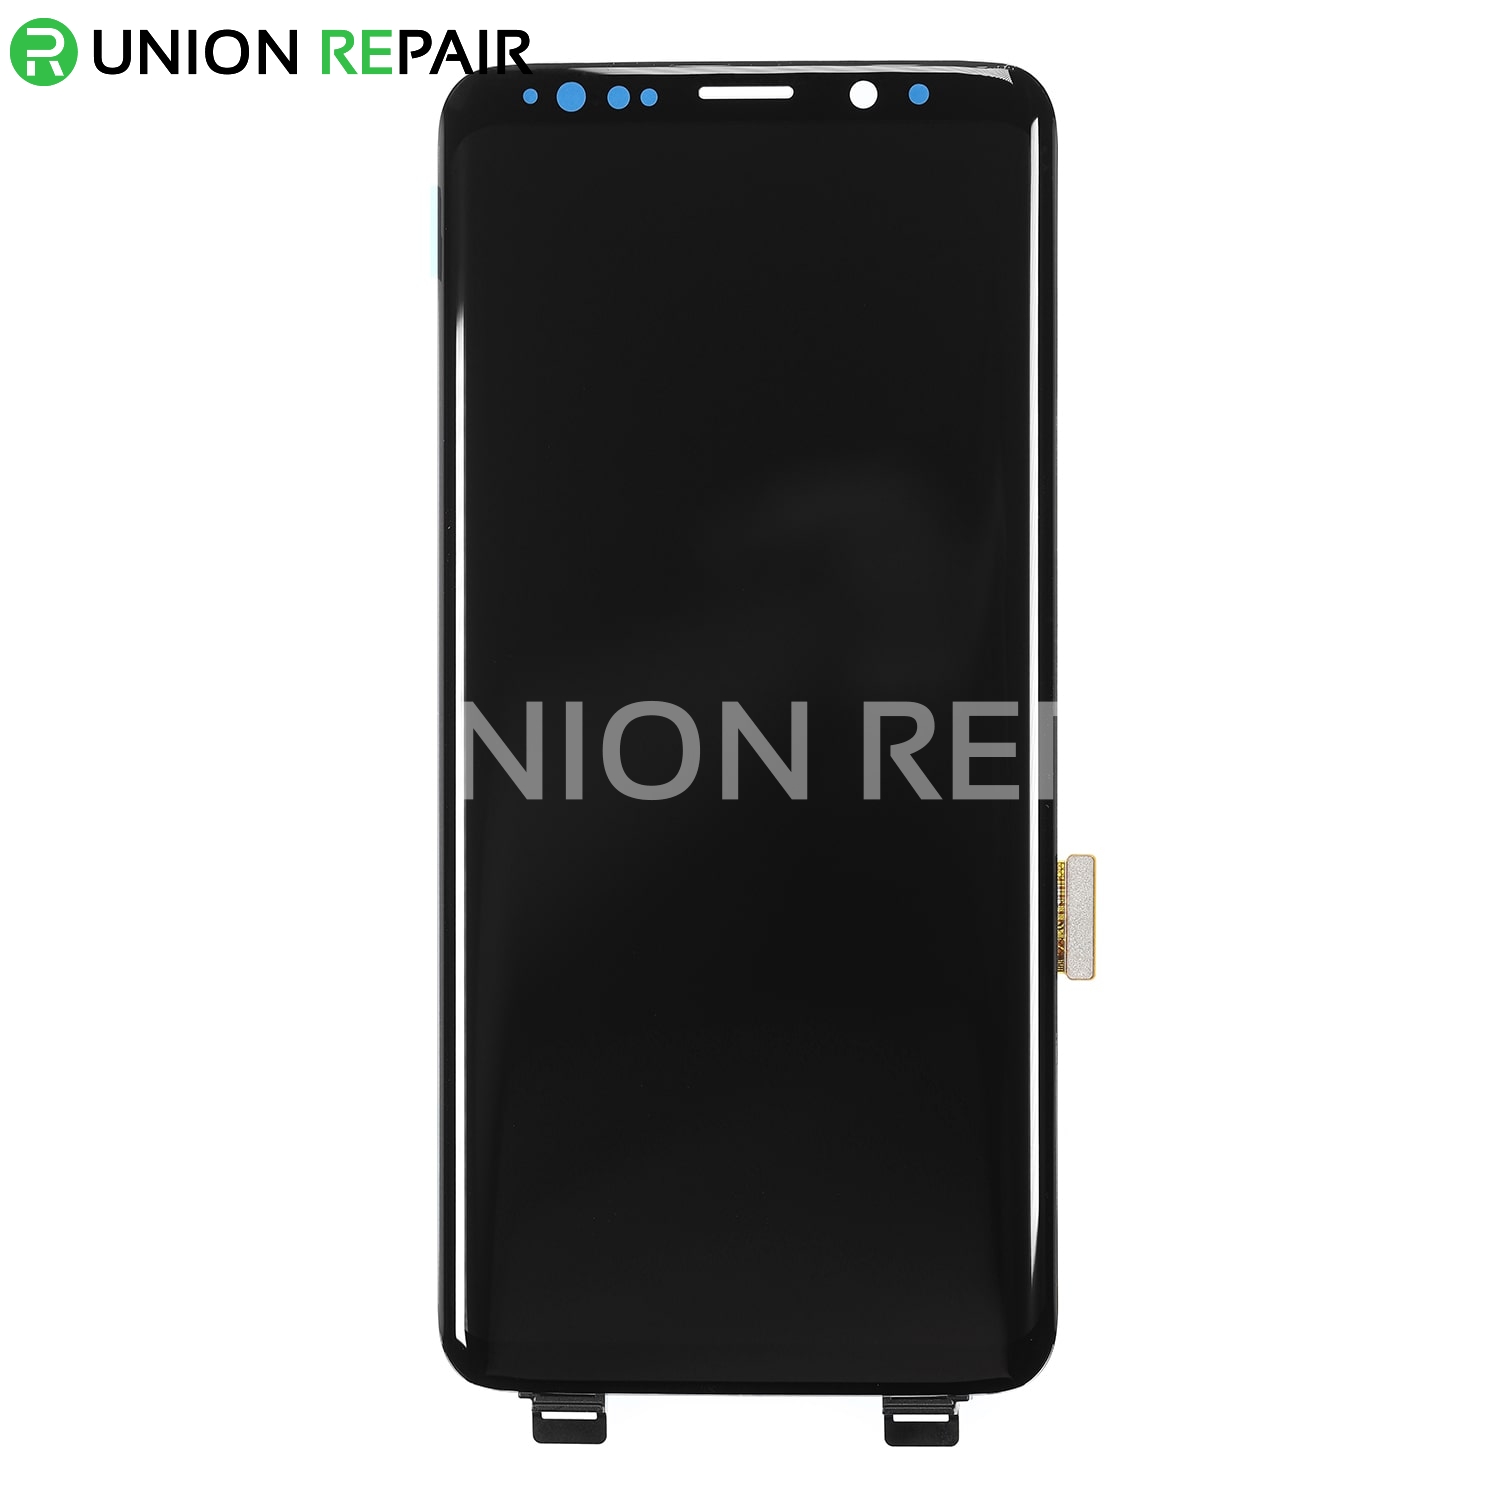 Replacement for Samsung Galaxy S9 SM-G960 LCD Screen Digitizer - Black